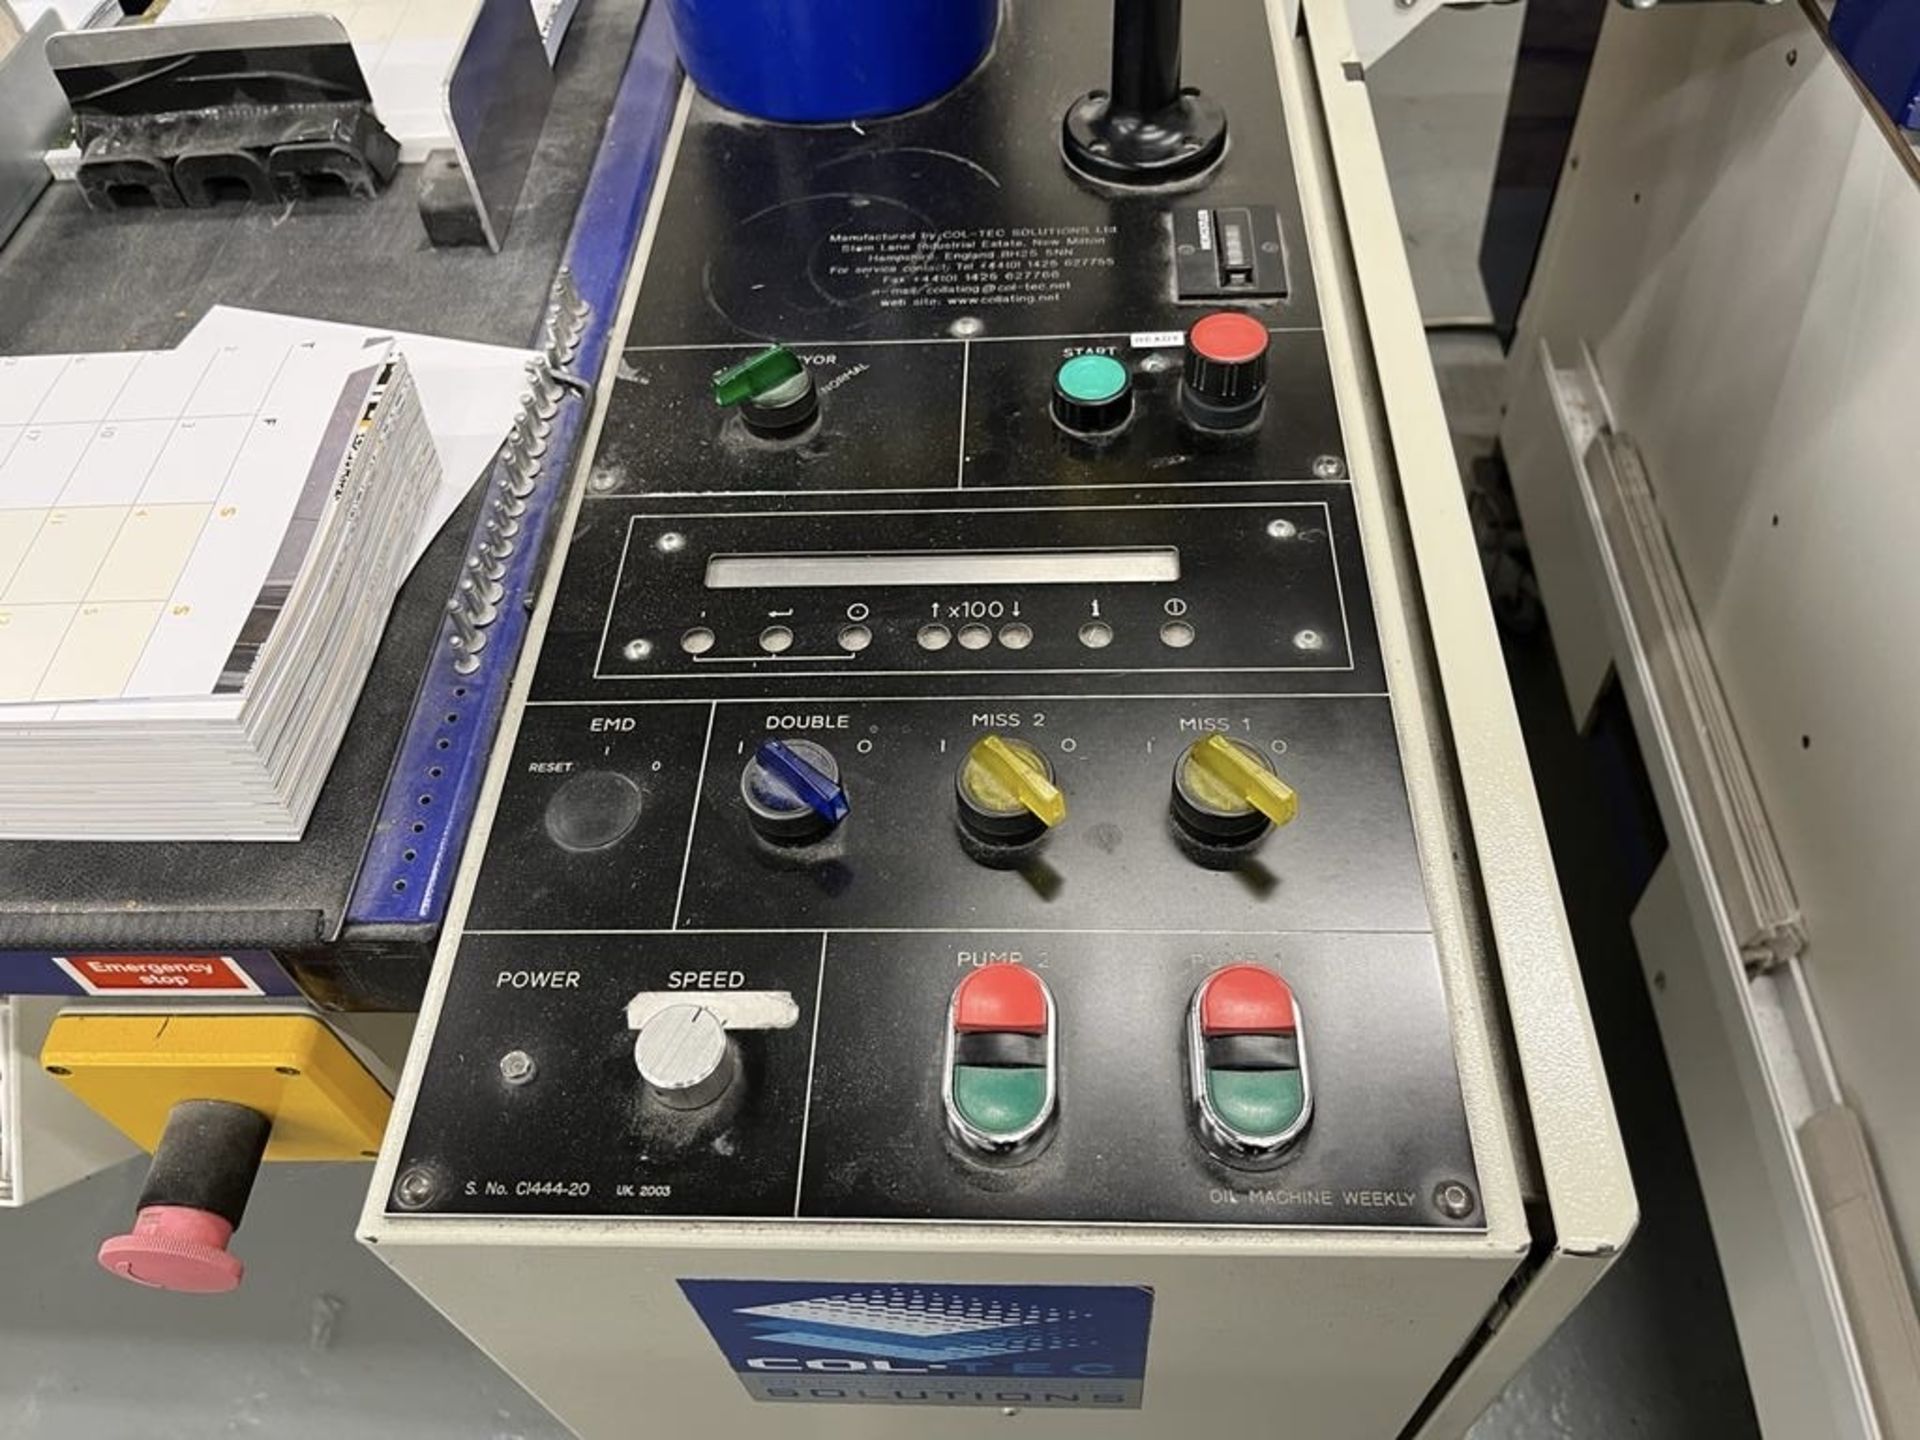 Col-tec 48x35 Duplex 24-station Collator, year 2015, serial number CR1533-13-26, 330-440 volts, with - Image 16 of 20